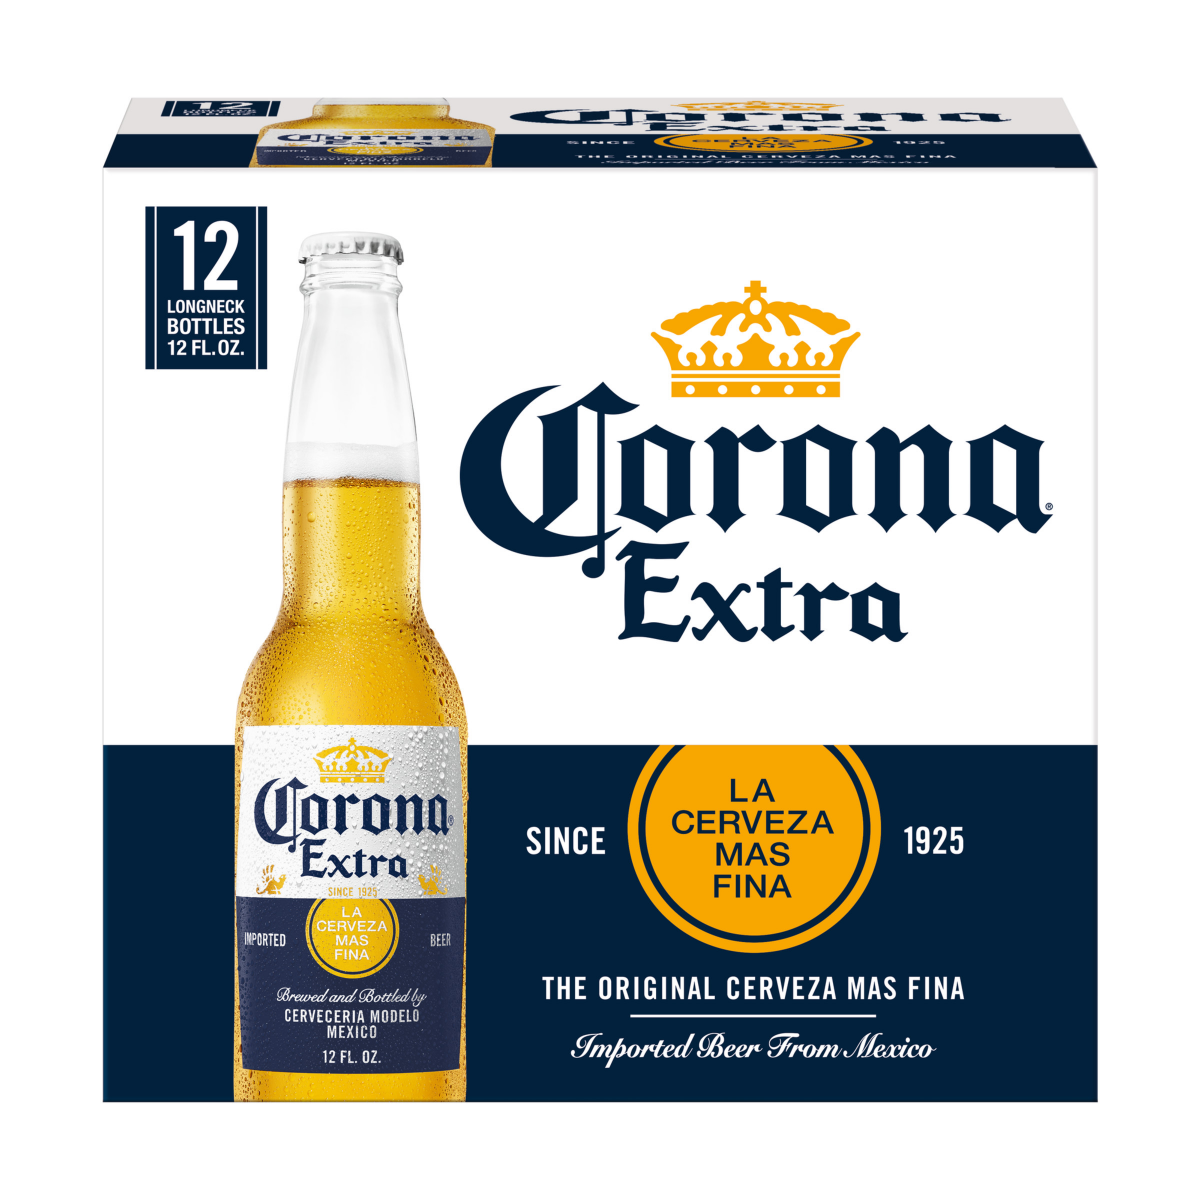 Corona Extra Alcohol Content: Strength of the Mexican Lager